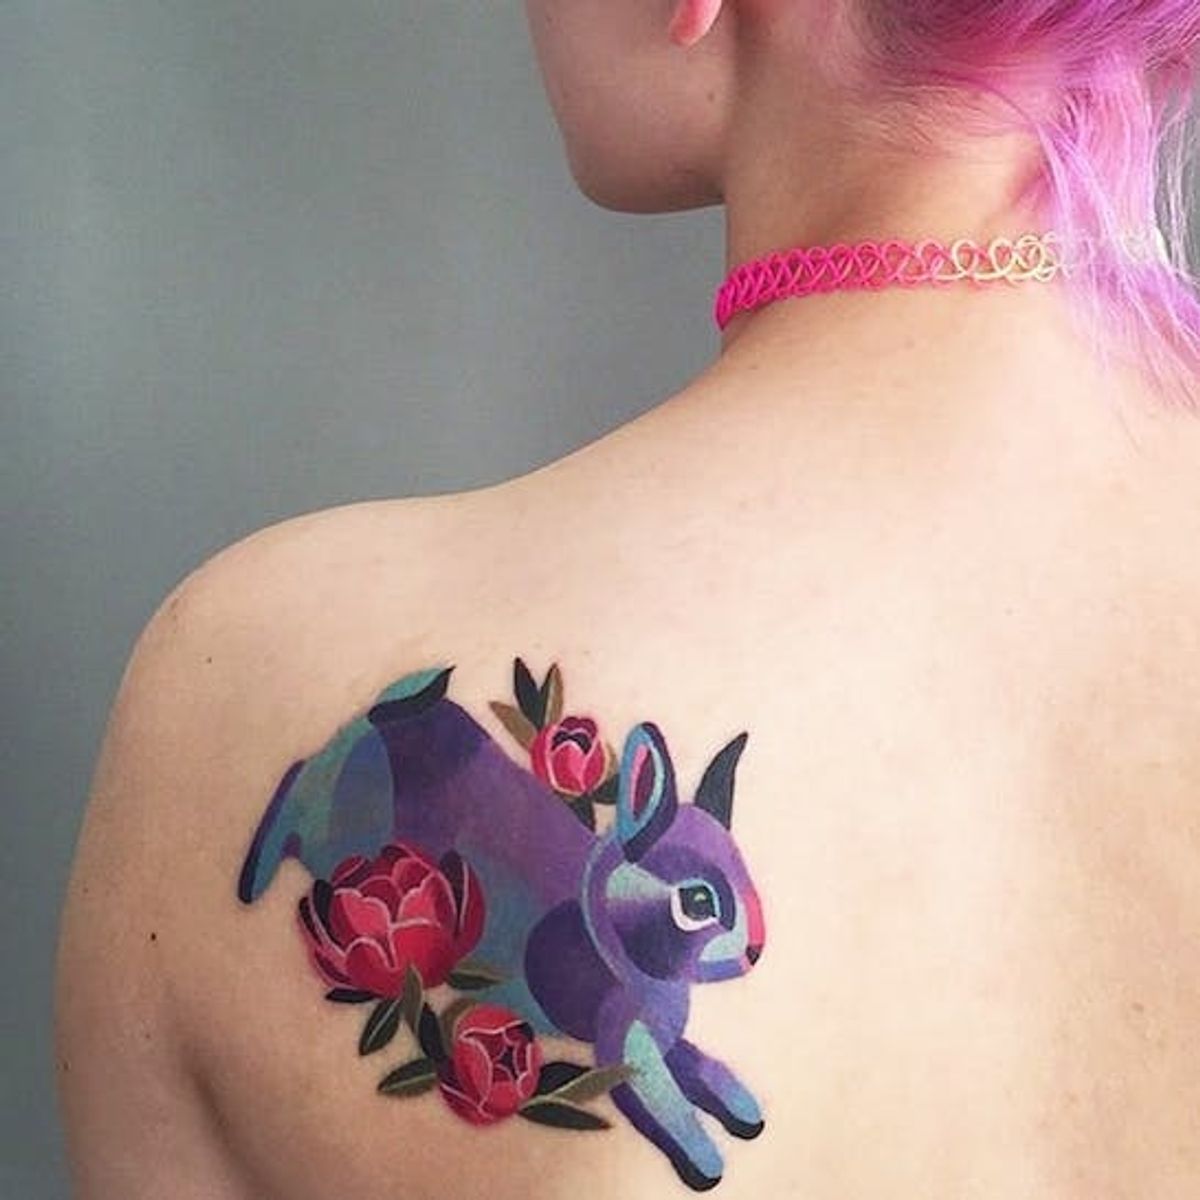 This Geometric-Inspired Tattoo Artist Is Our Next #GirlCrush